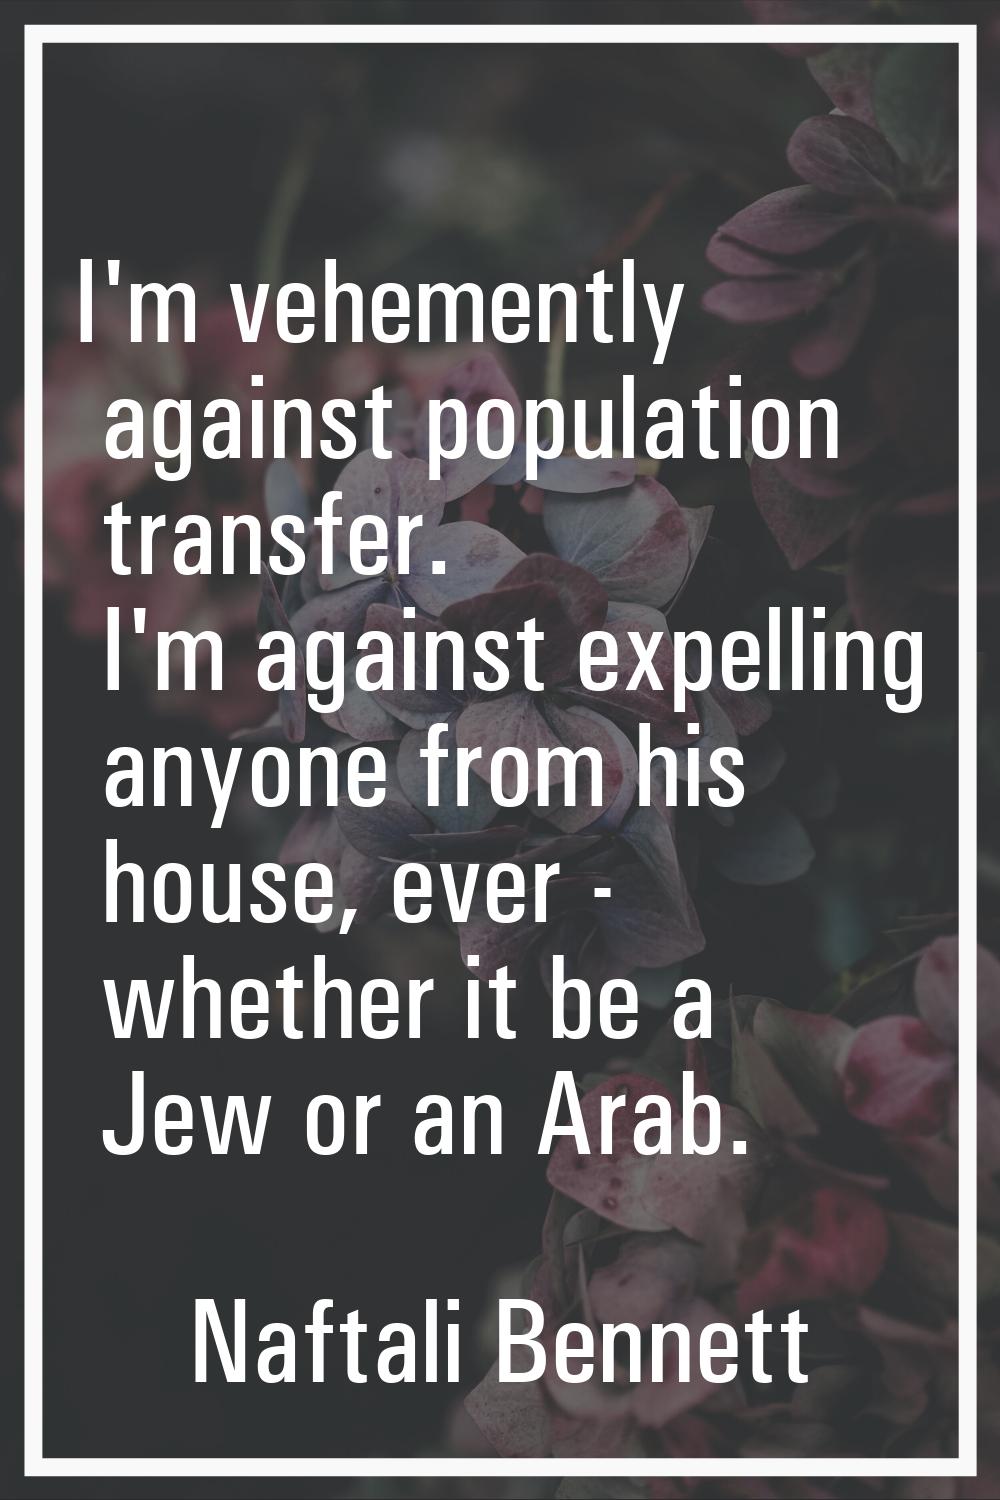 I'm vehemently against population transfer. I'm against expelling anyone from his house, ever - whe